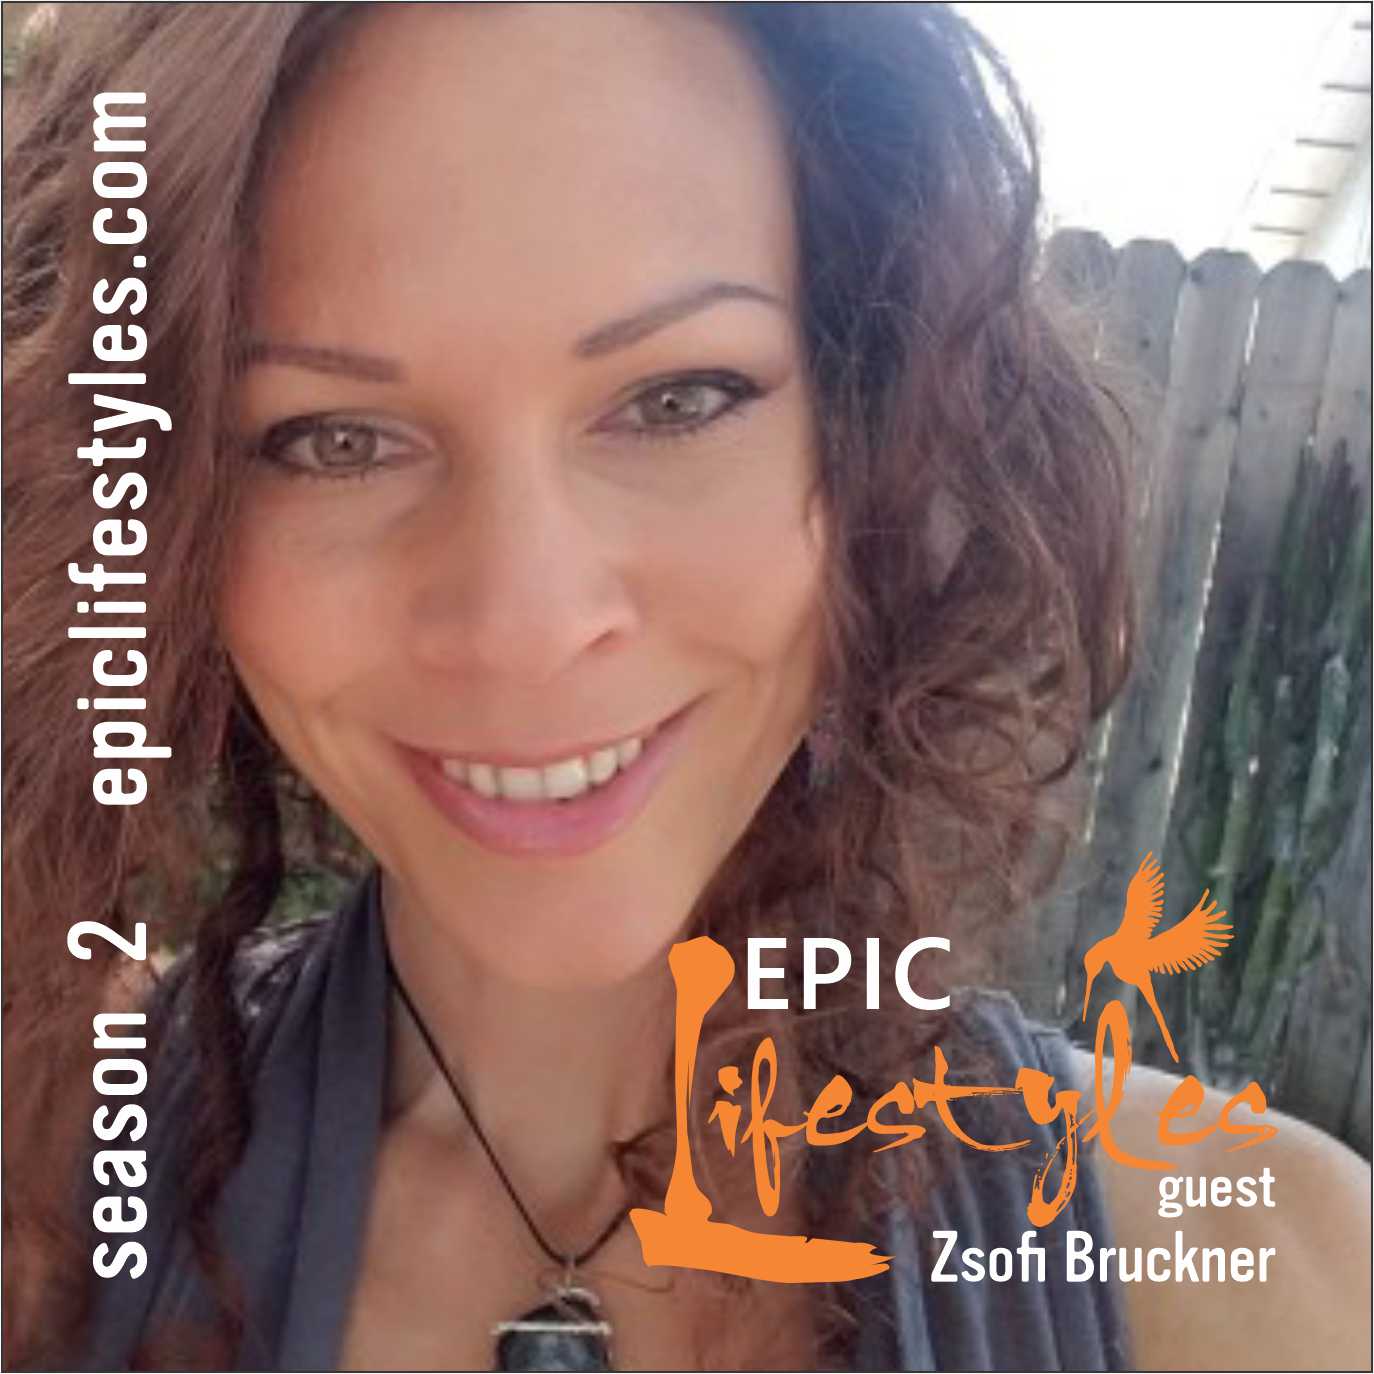 Epic Lifestyles Podcast Season 2 Launched